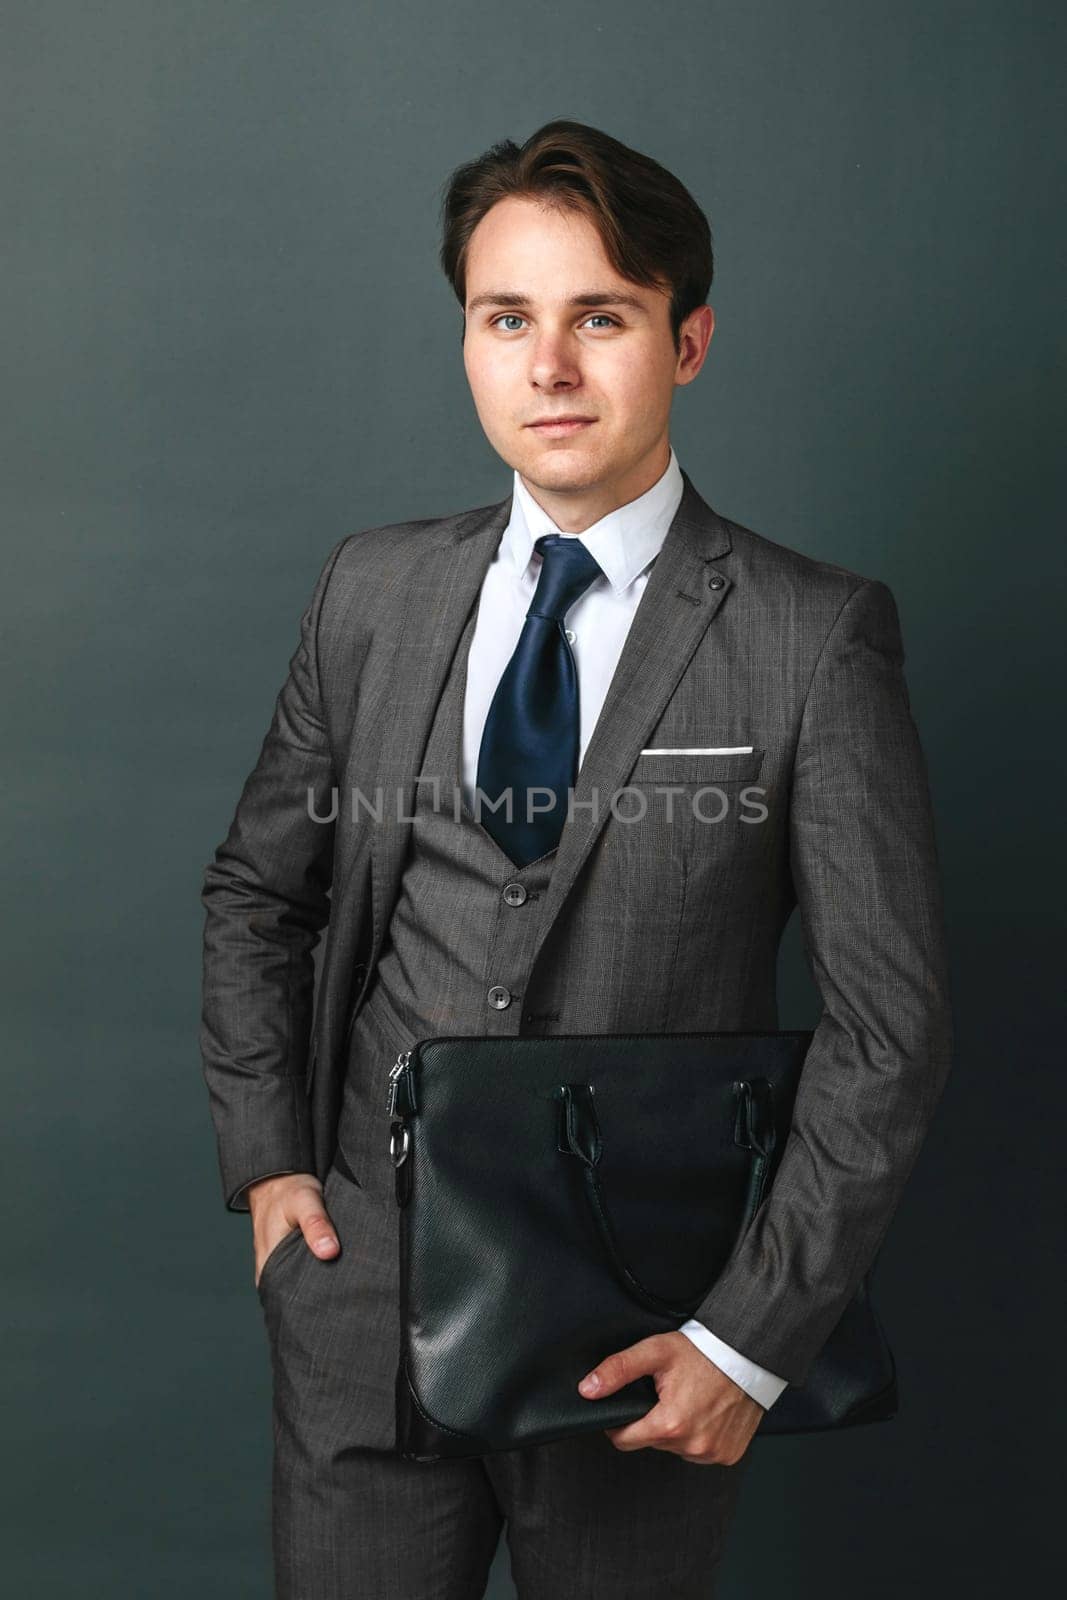 Business and finance concept. Portrait of a businessman who is holding a briefcase. Light background